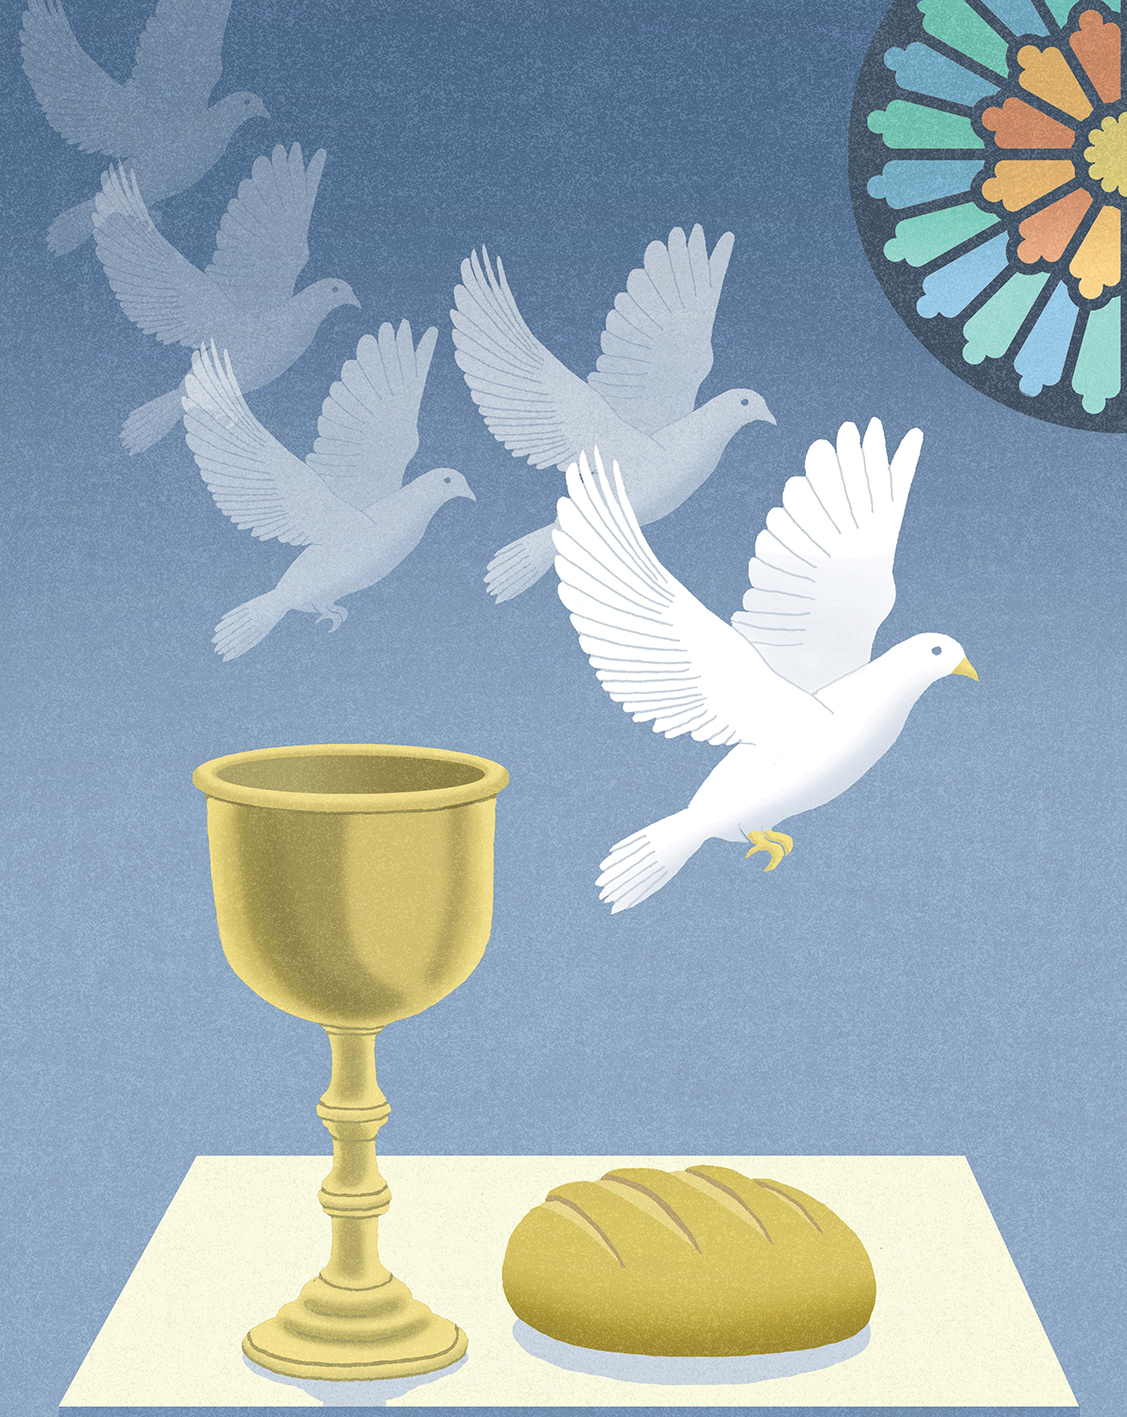 The Eucharist, Imagined and Real